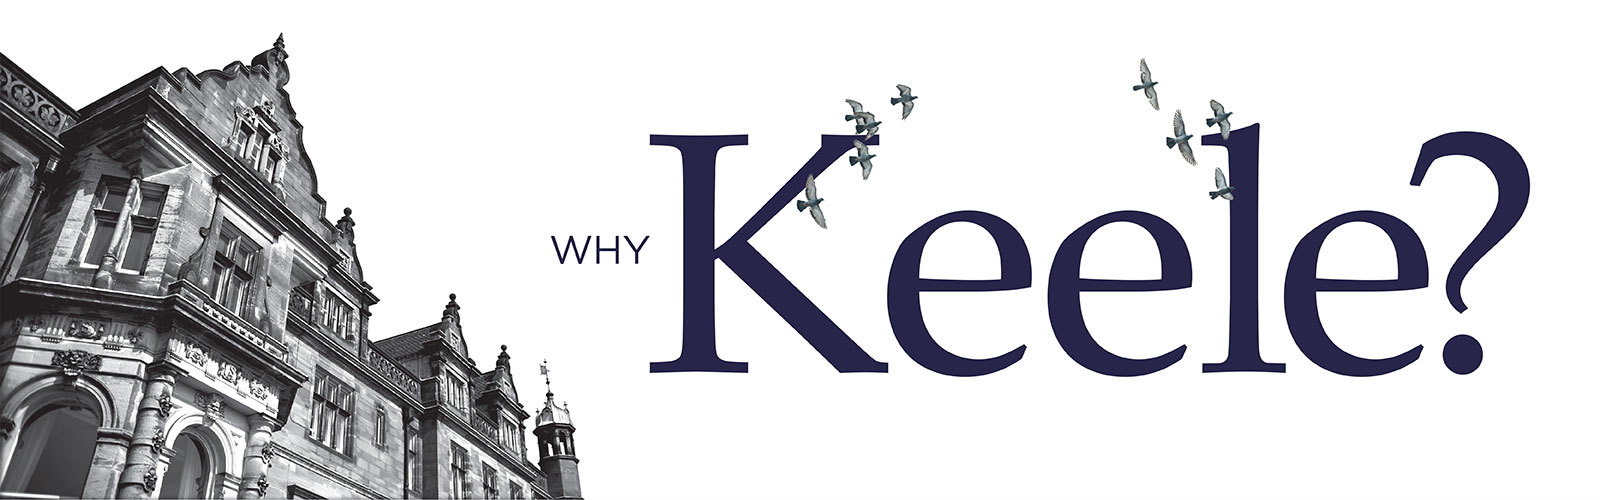 Image of Keele Hall with text overlay 'Why Keele?'